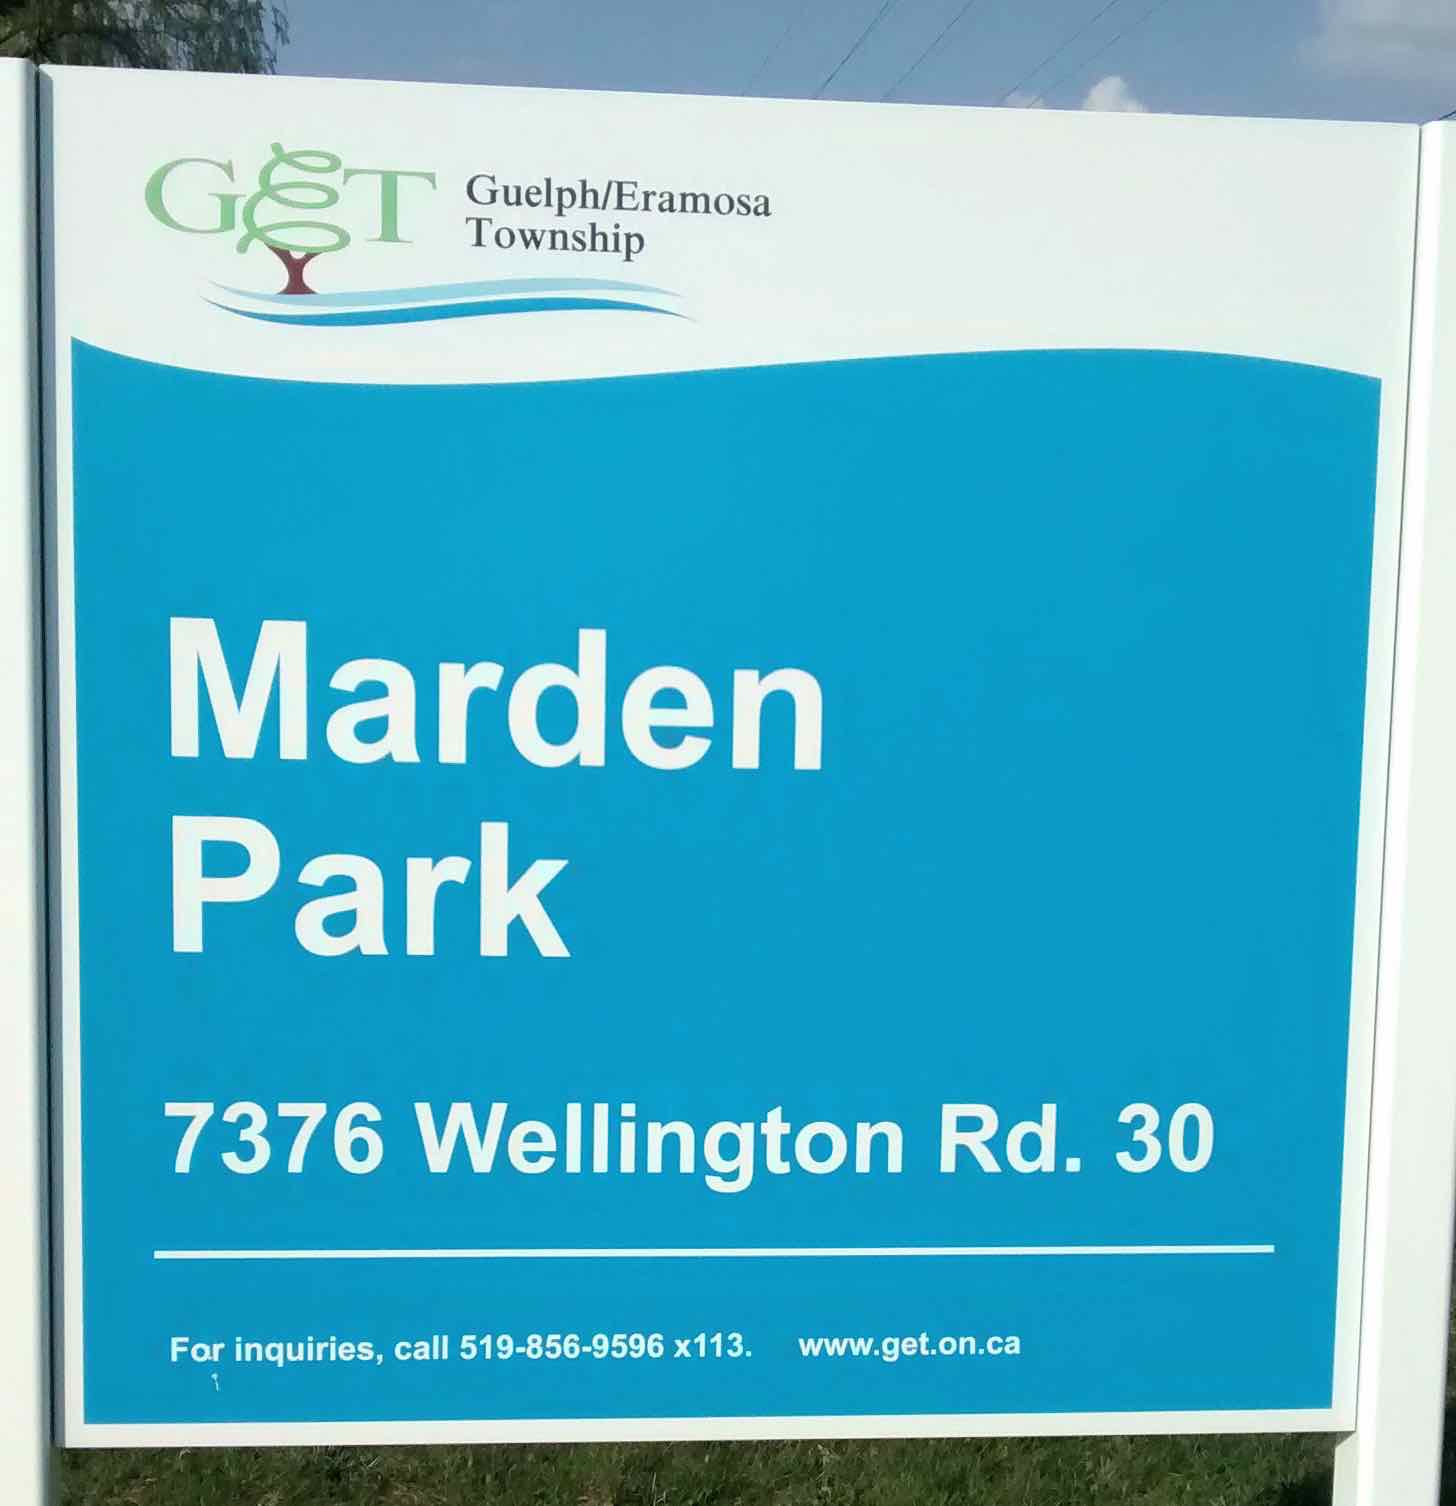 Marden Park and Community Centre and Park Guelph Eramosa Township AA